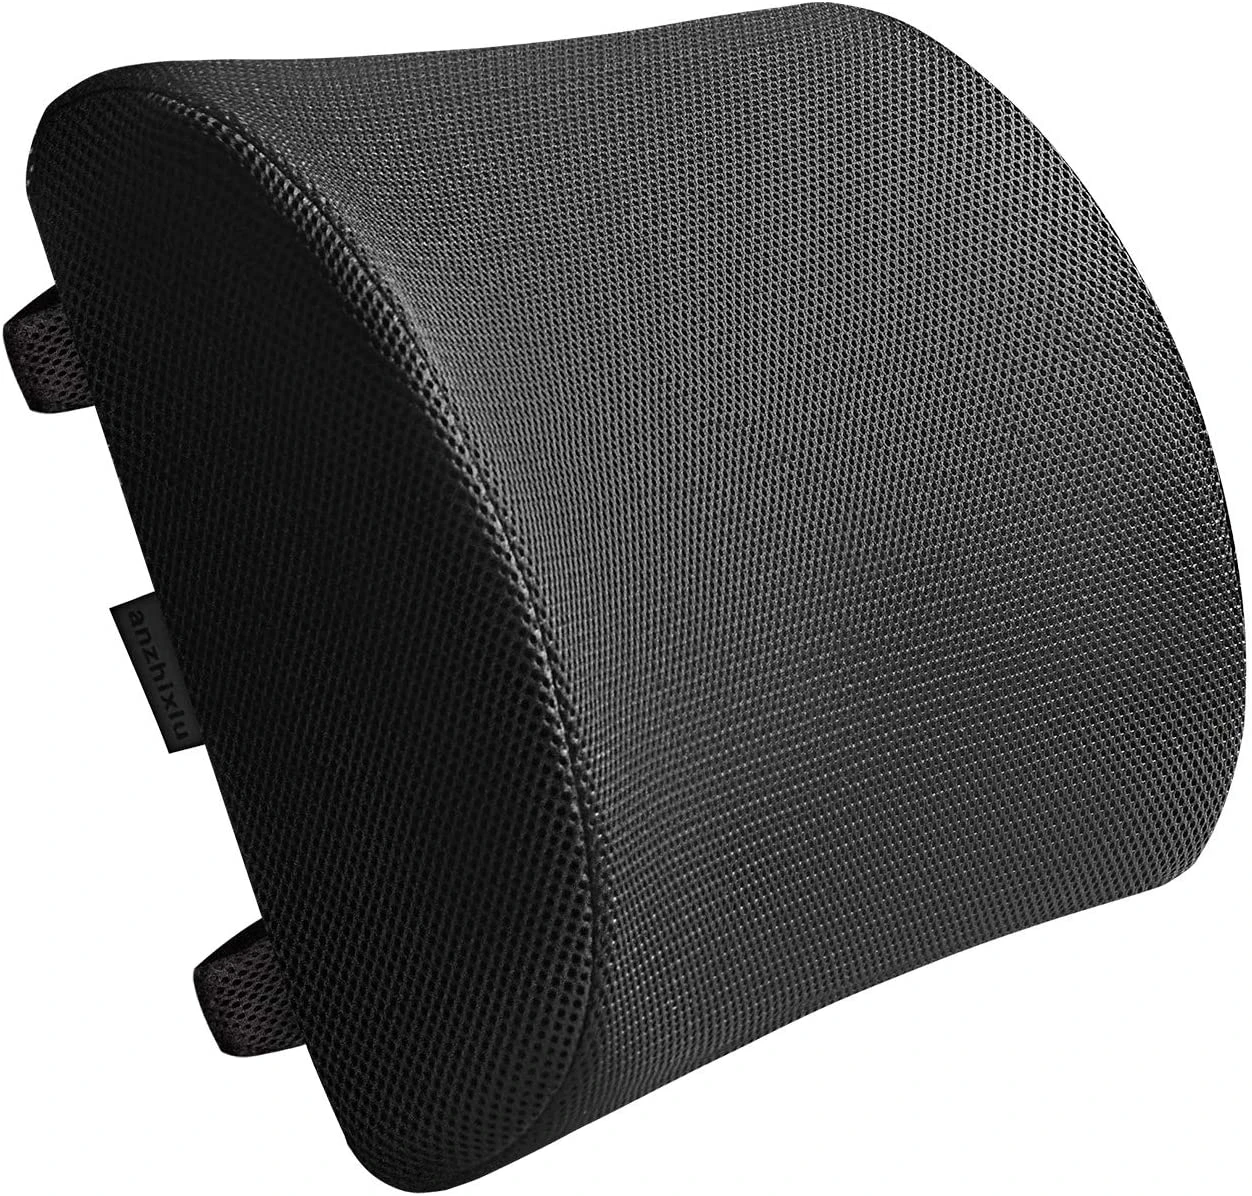 3D Mesh Lumbar Support Pillow Lower Back Pain Relief Back Support Cushion Pillow with Washable Cover